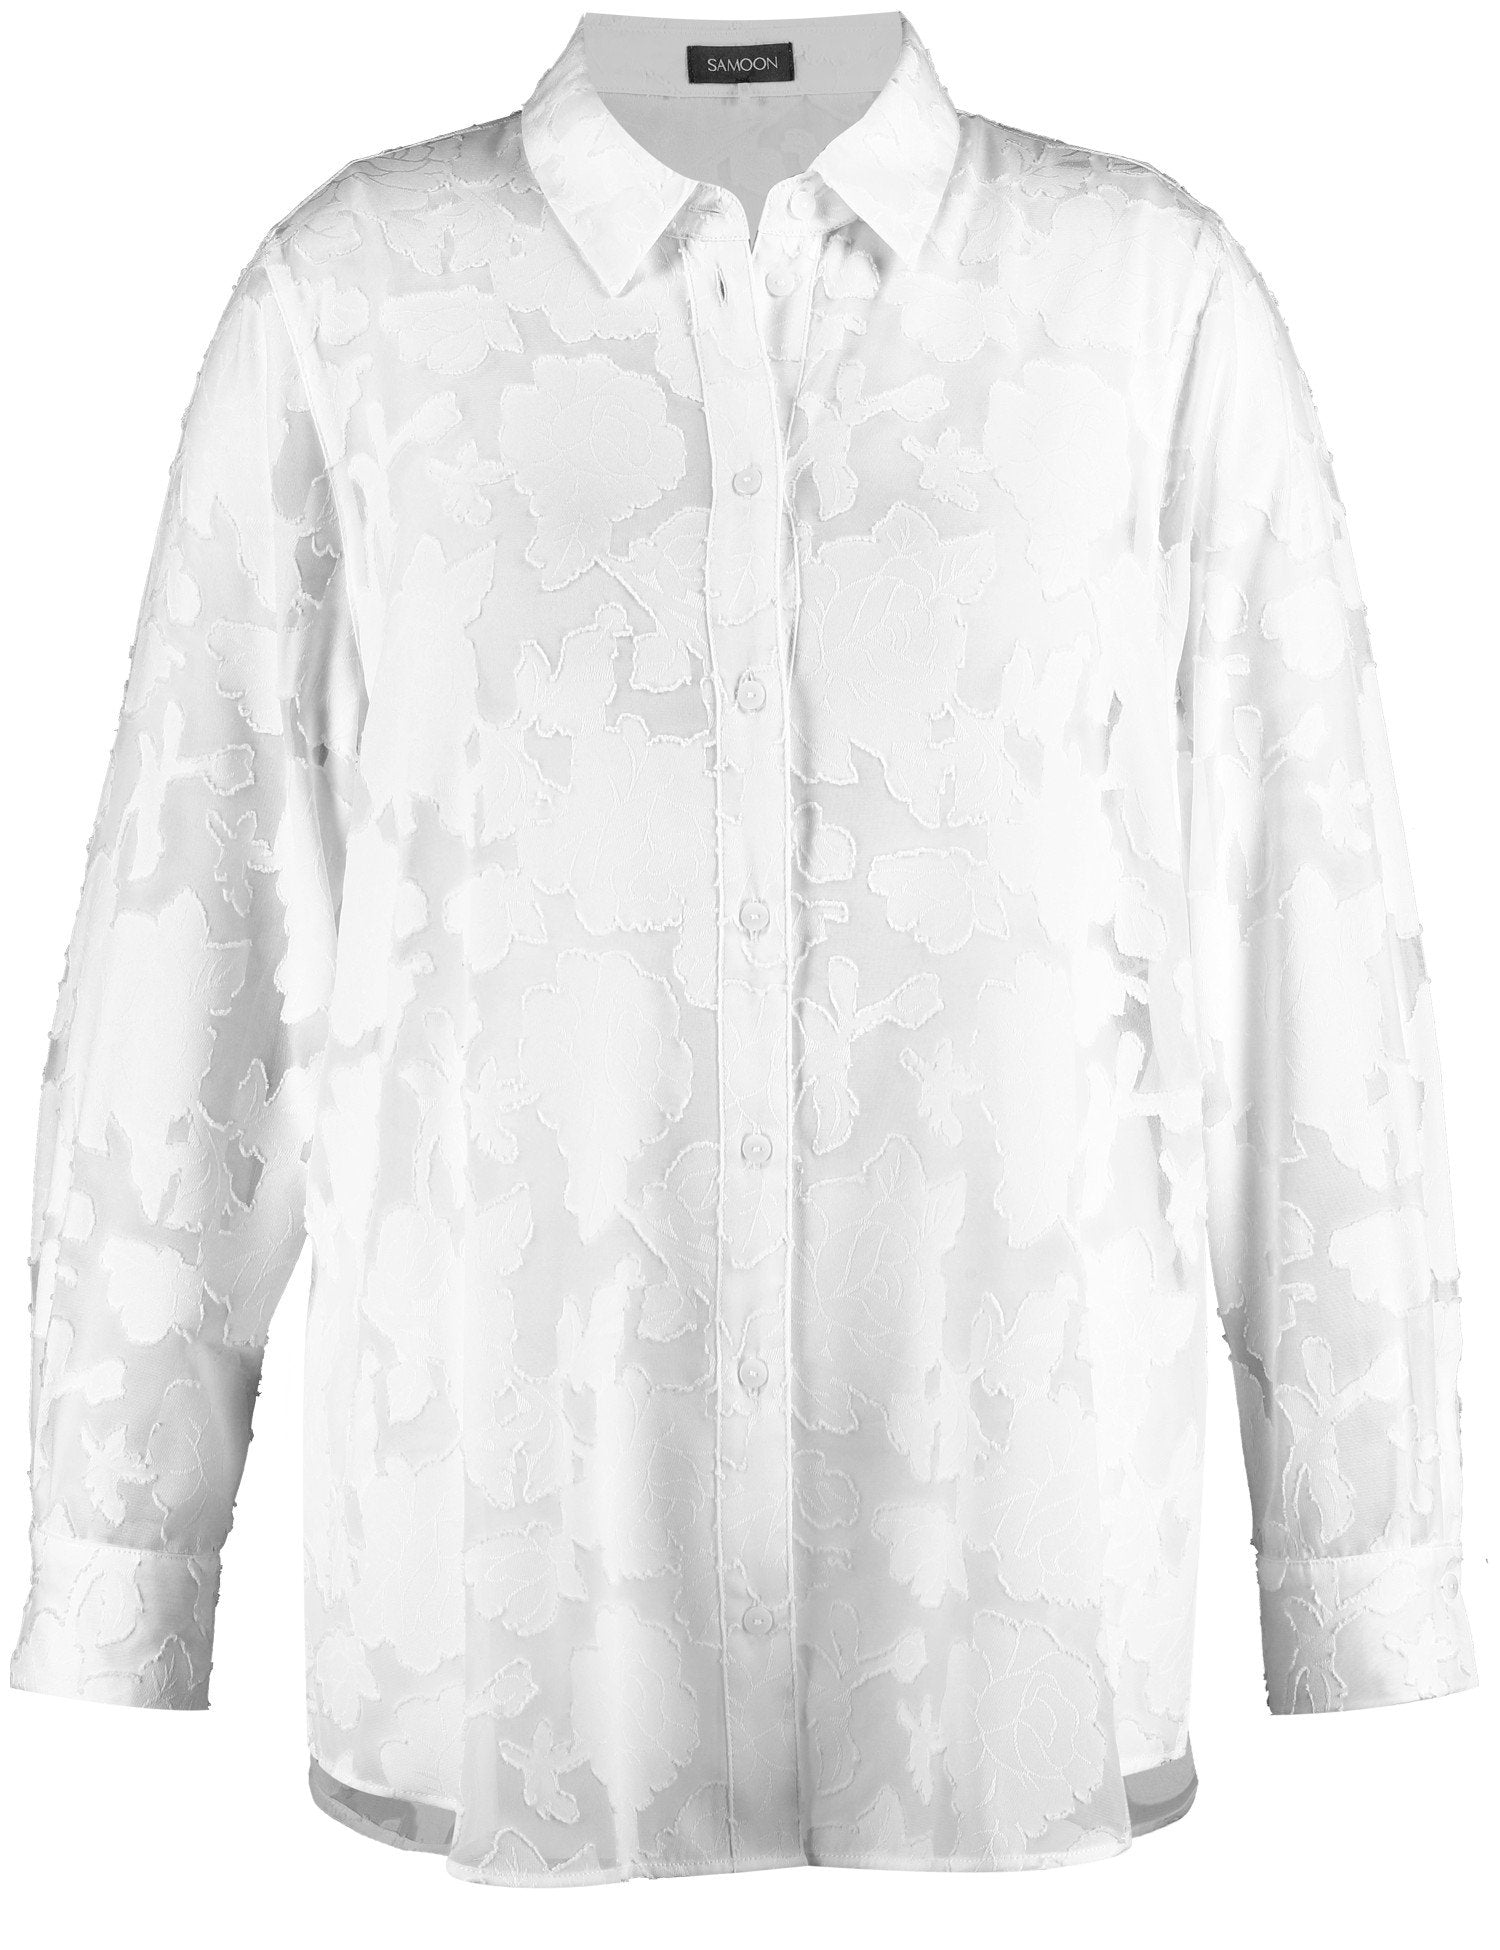 Blouse With A Sheer Floral Pattern_460013-21015_9600_06